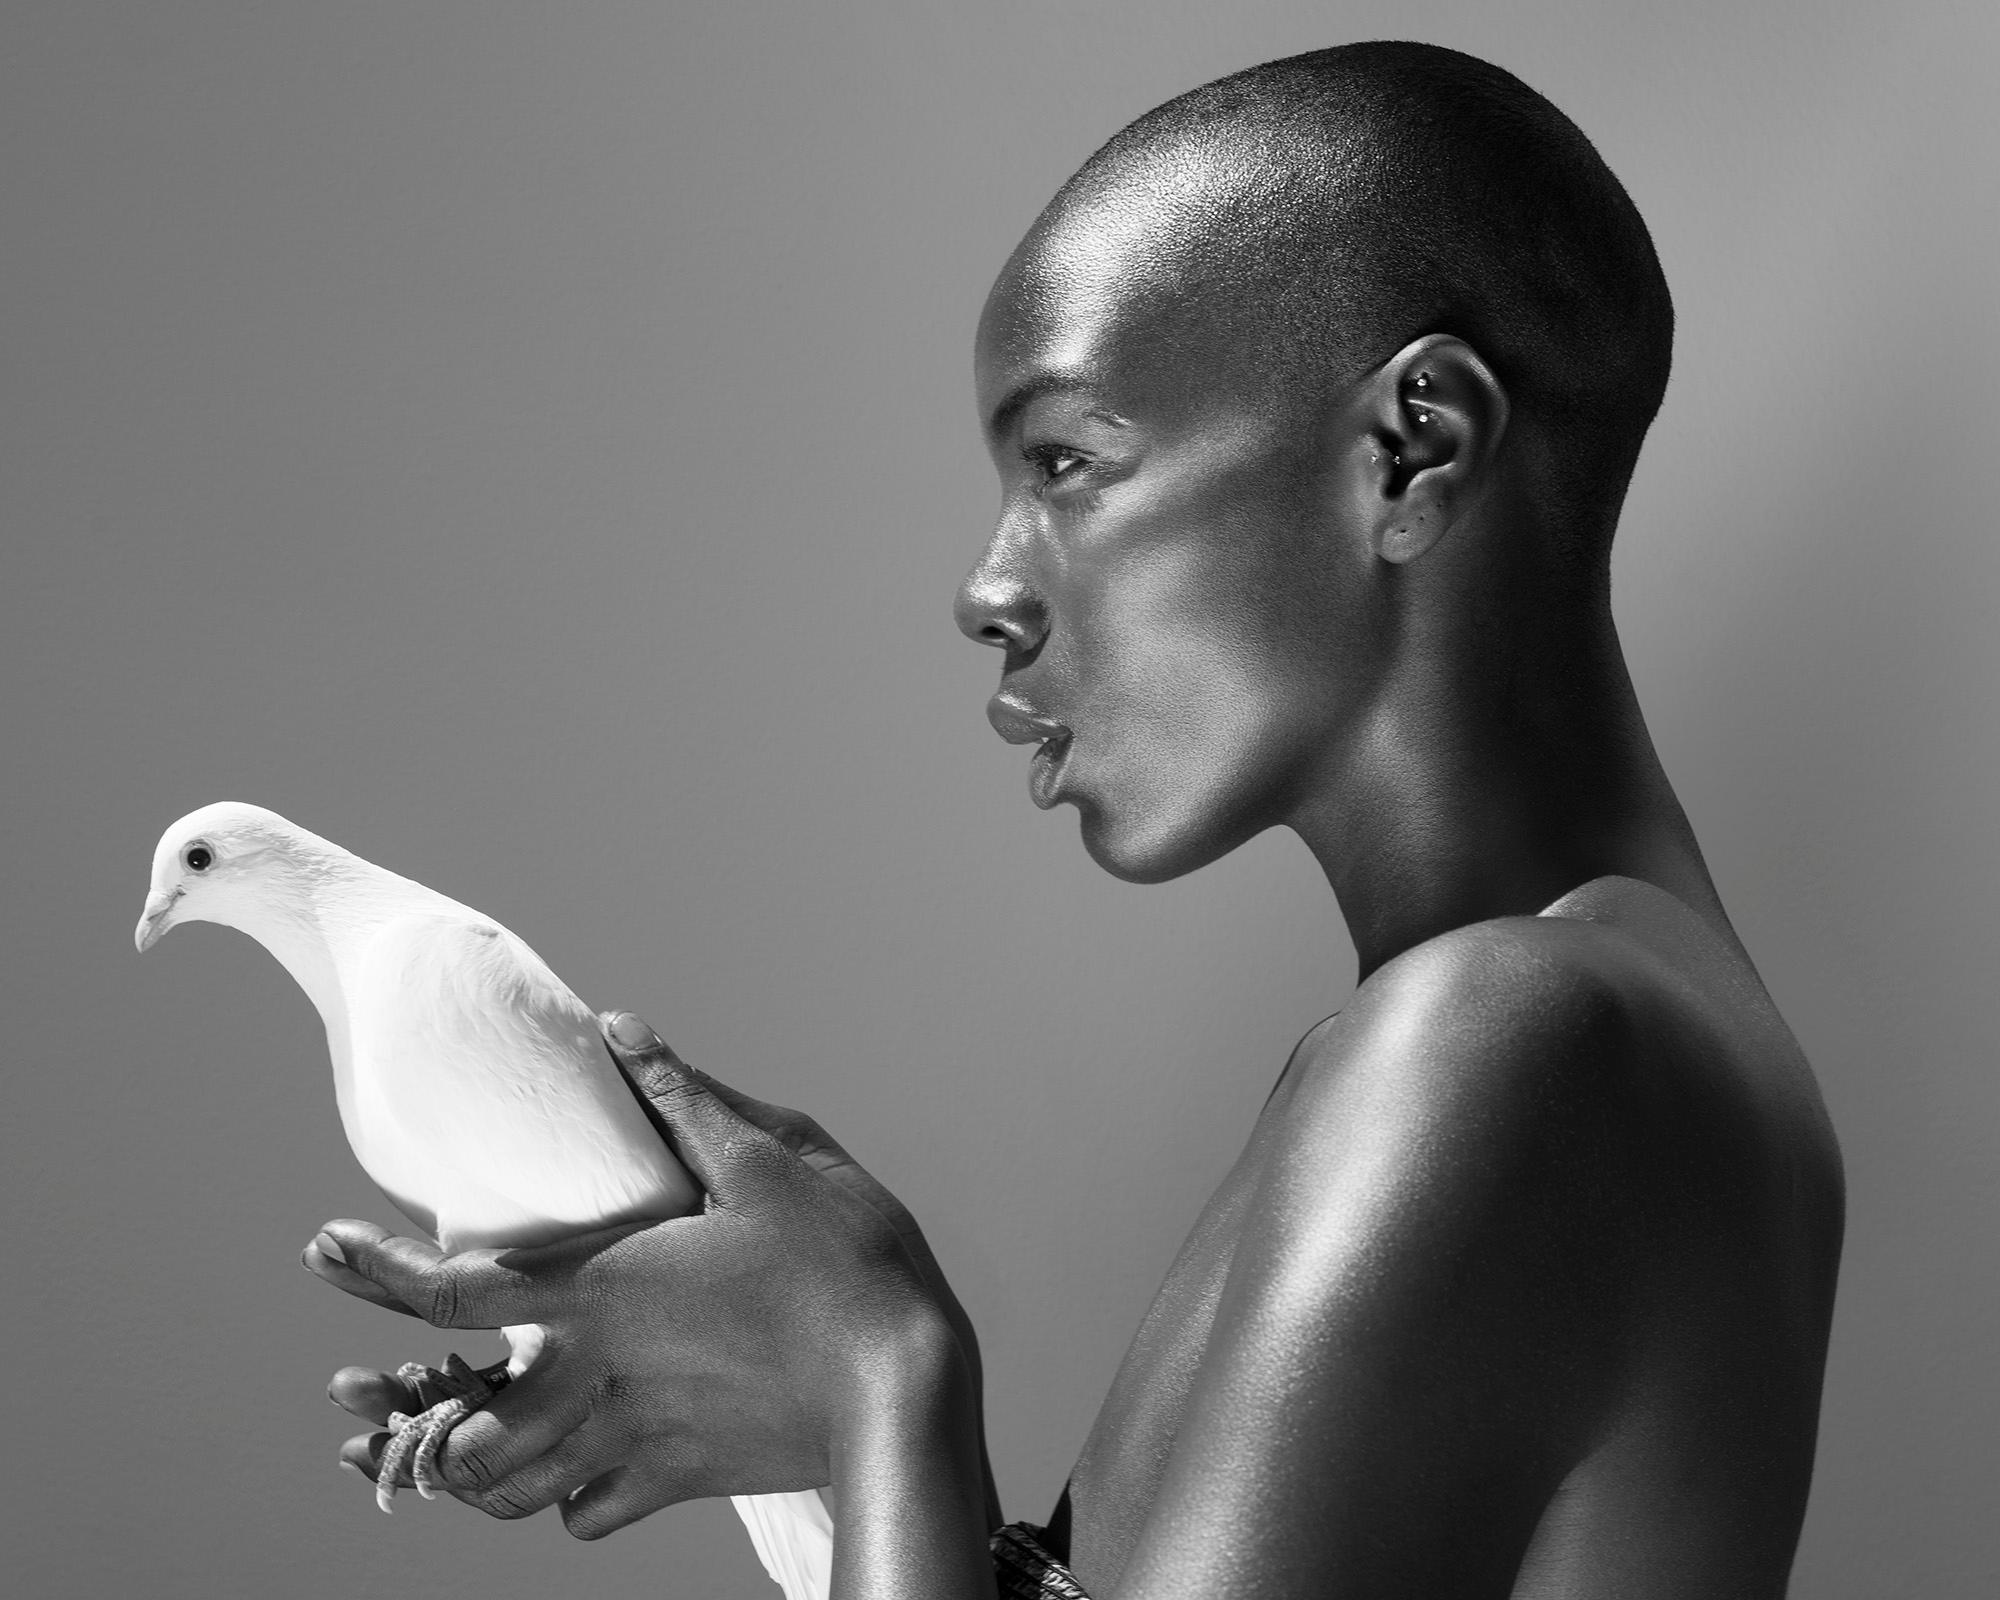 Sylvie Blum Black and White Photograph - The pigeon, 21st century, contemporary, photography